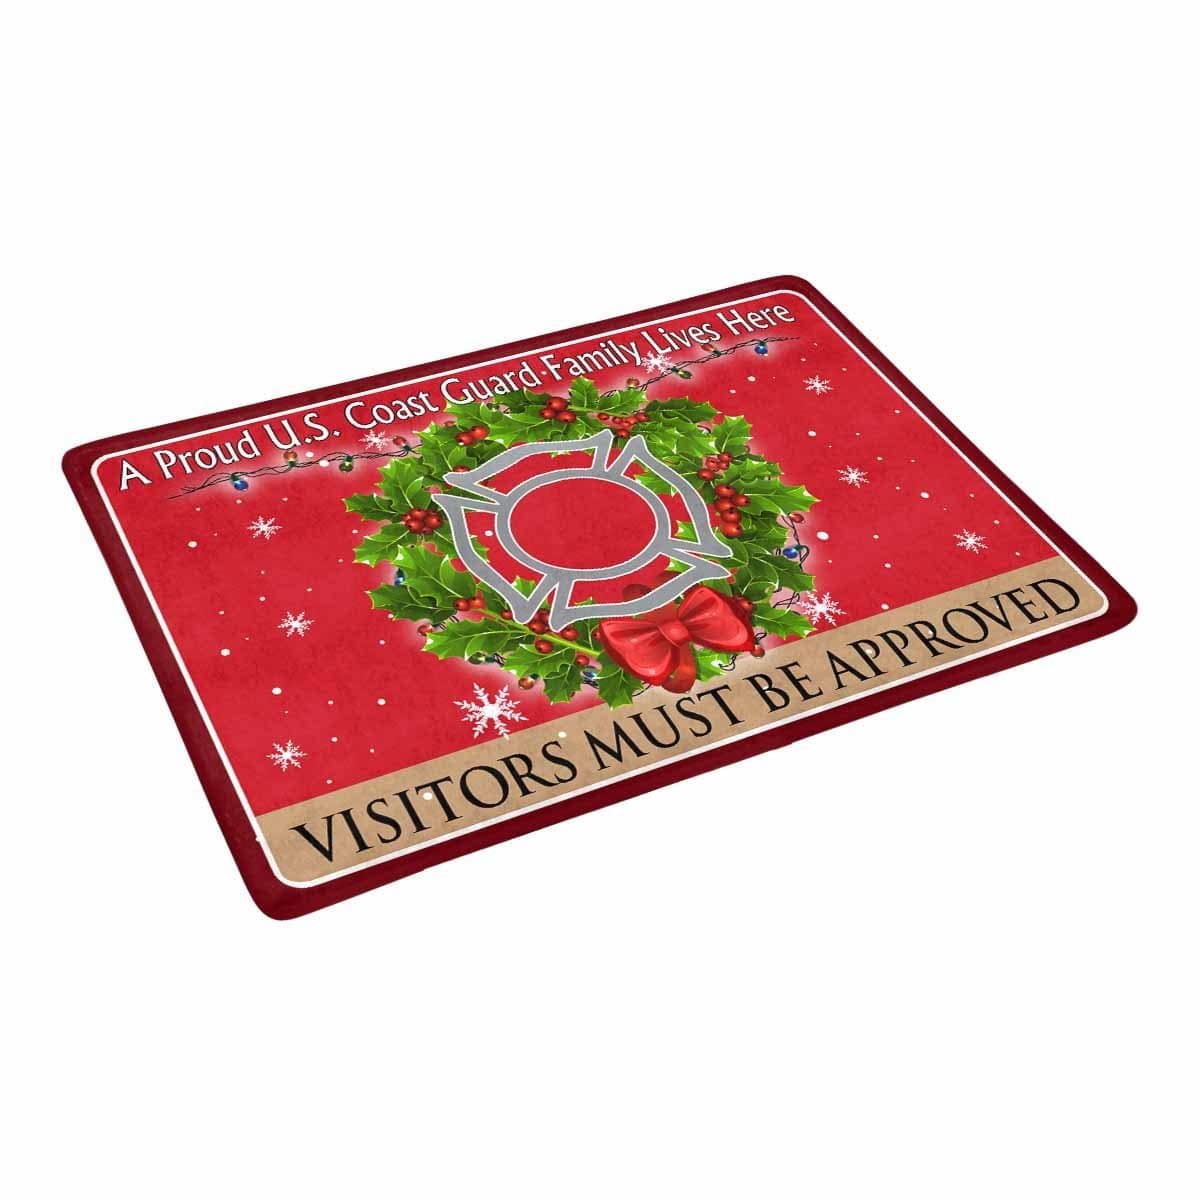 US Coast Guard Fire and Safety Specialist FF Logo - Visitors must be approved Christmas Doormat-Doormat-USCG-Rate-Veterans Nation